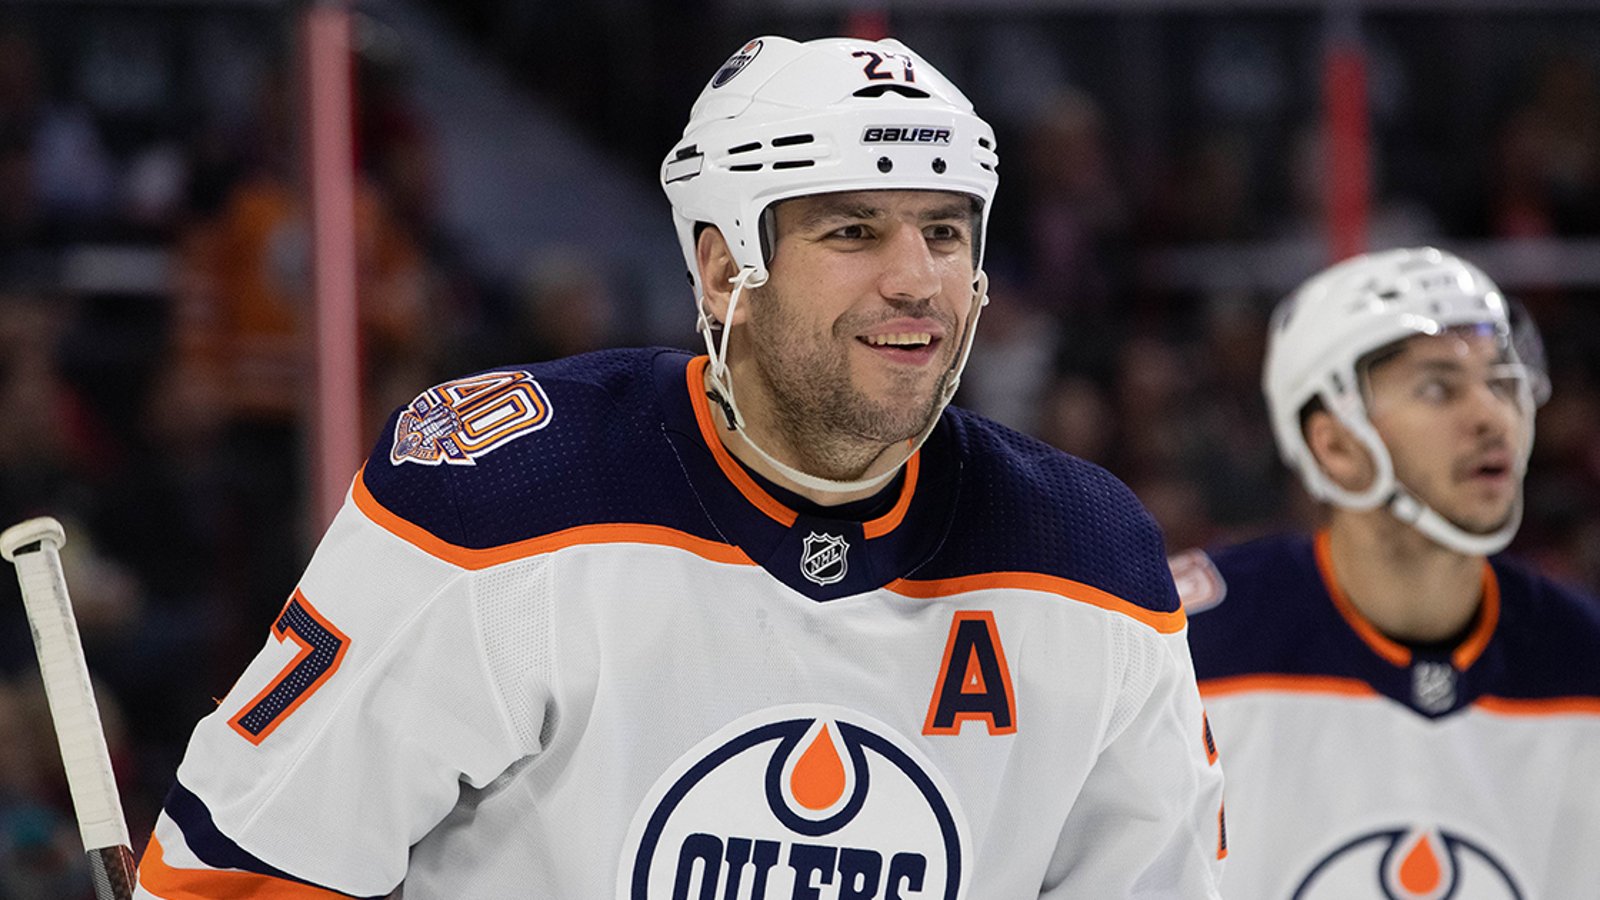 Lucic openly talks about leaving the Oilers and joining another NHL team